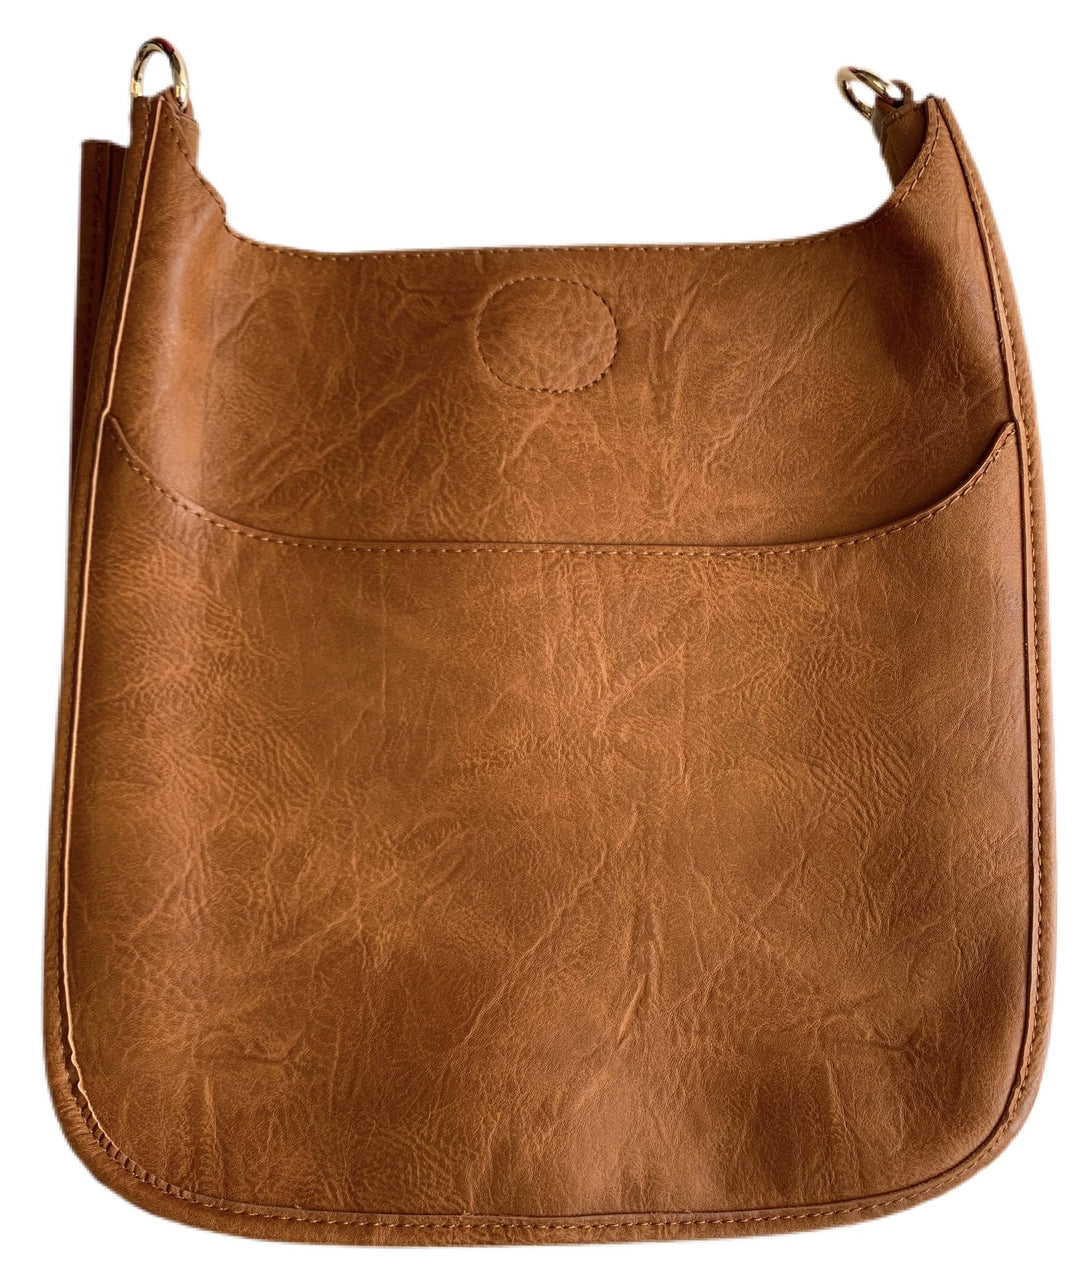 Ahdorned-Vegan Leather Classic Size Bag (No Strap) -Camel - Shorely Chic Boutique